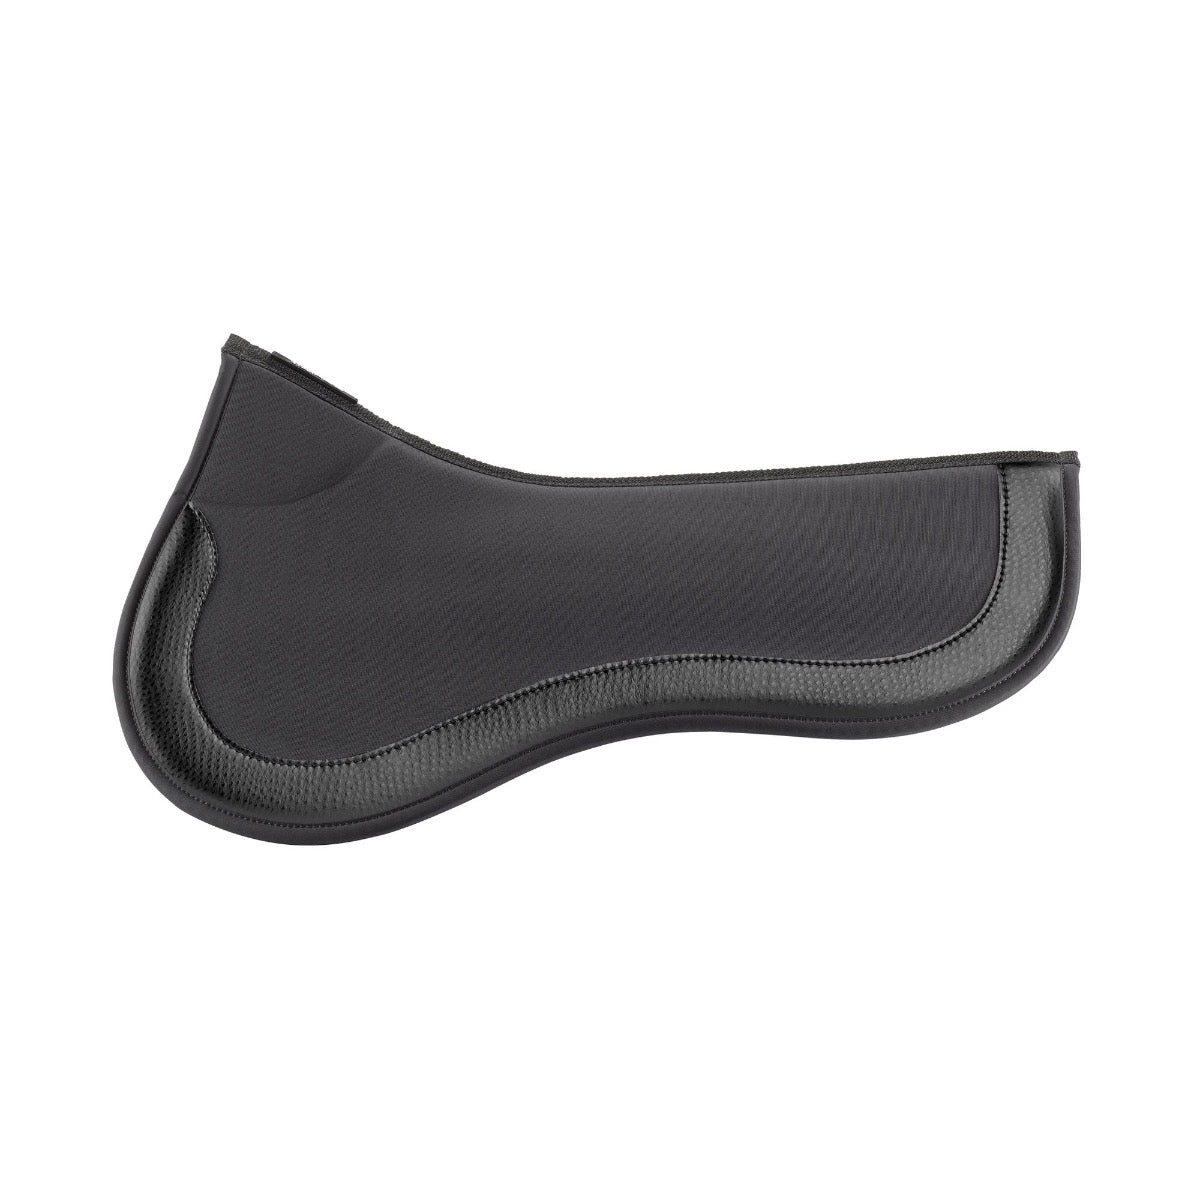 product shot image of the equifit custom impacteq half pad black ostrich